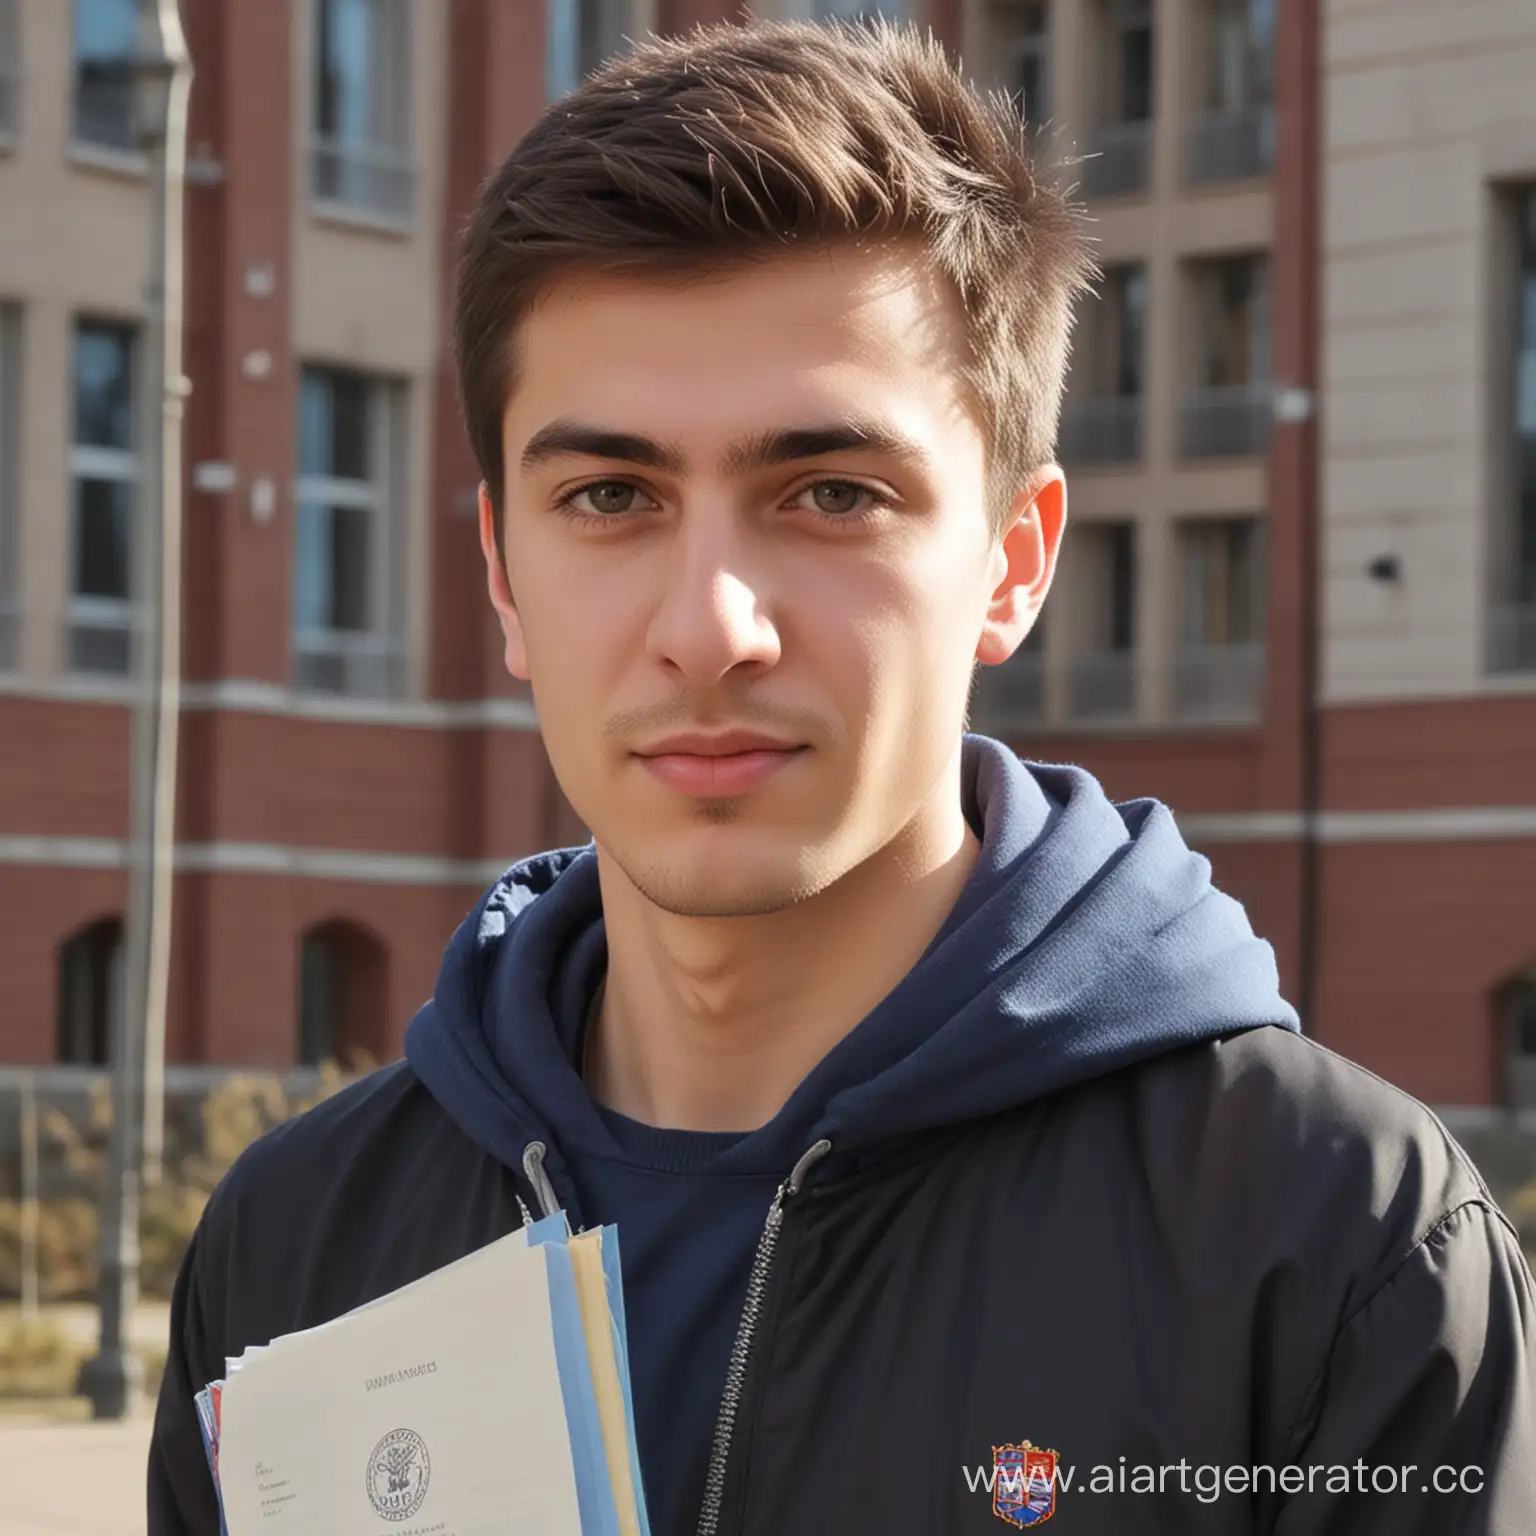 MGIMO-Student-with-Armenian-and-Russian-Heritage-Studying-in-Moscow